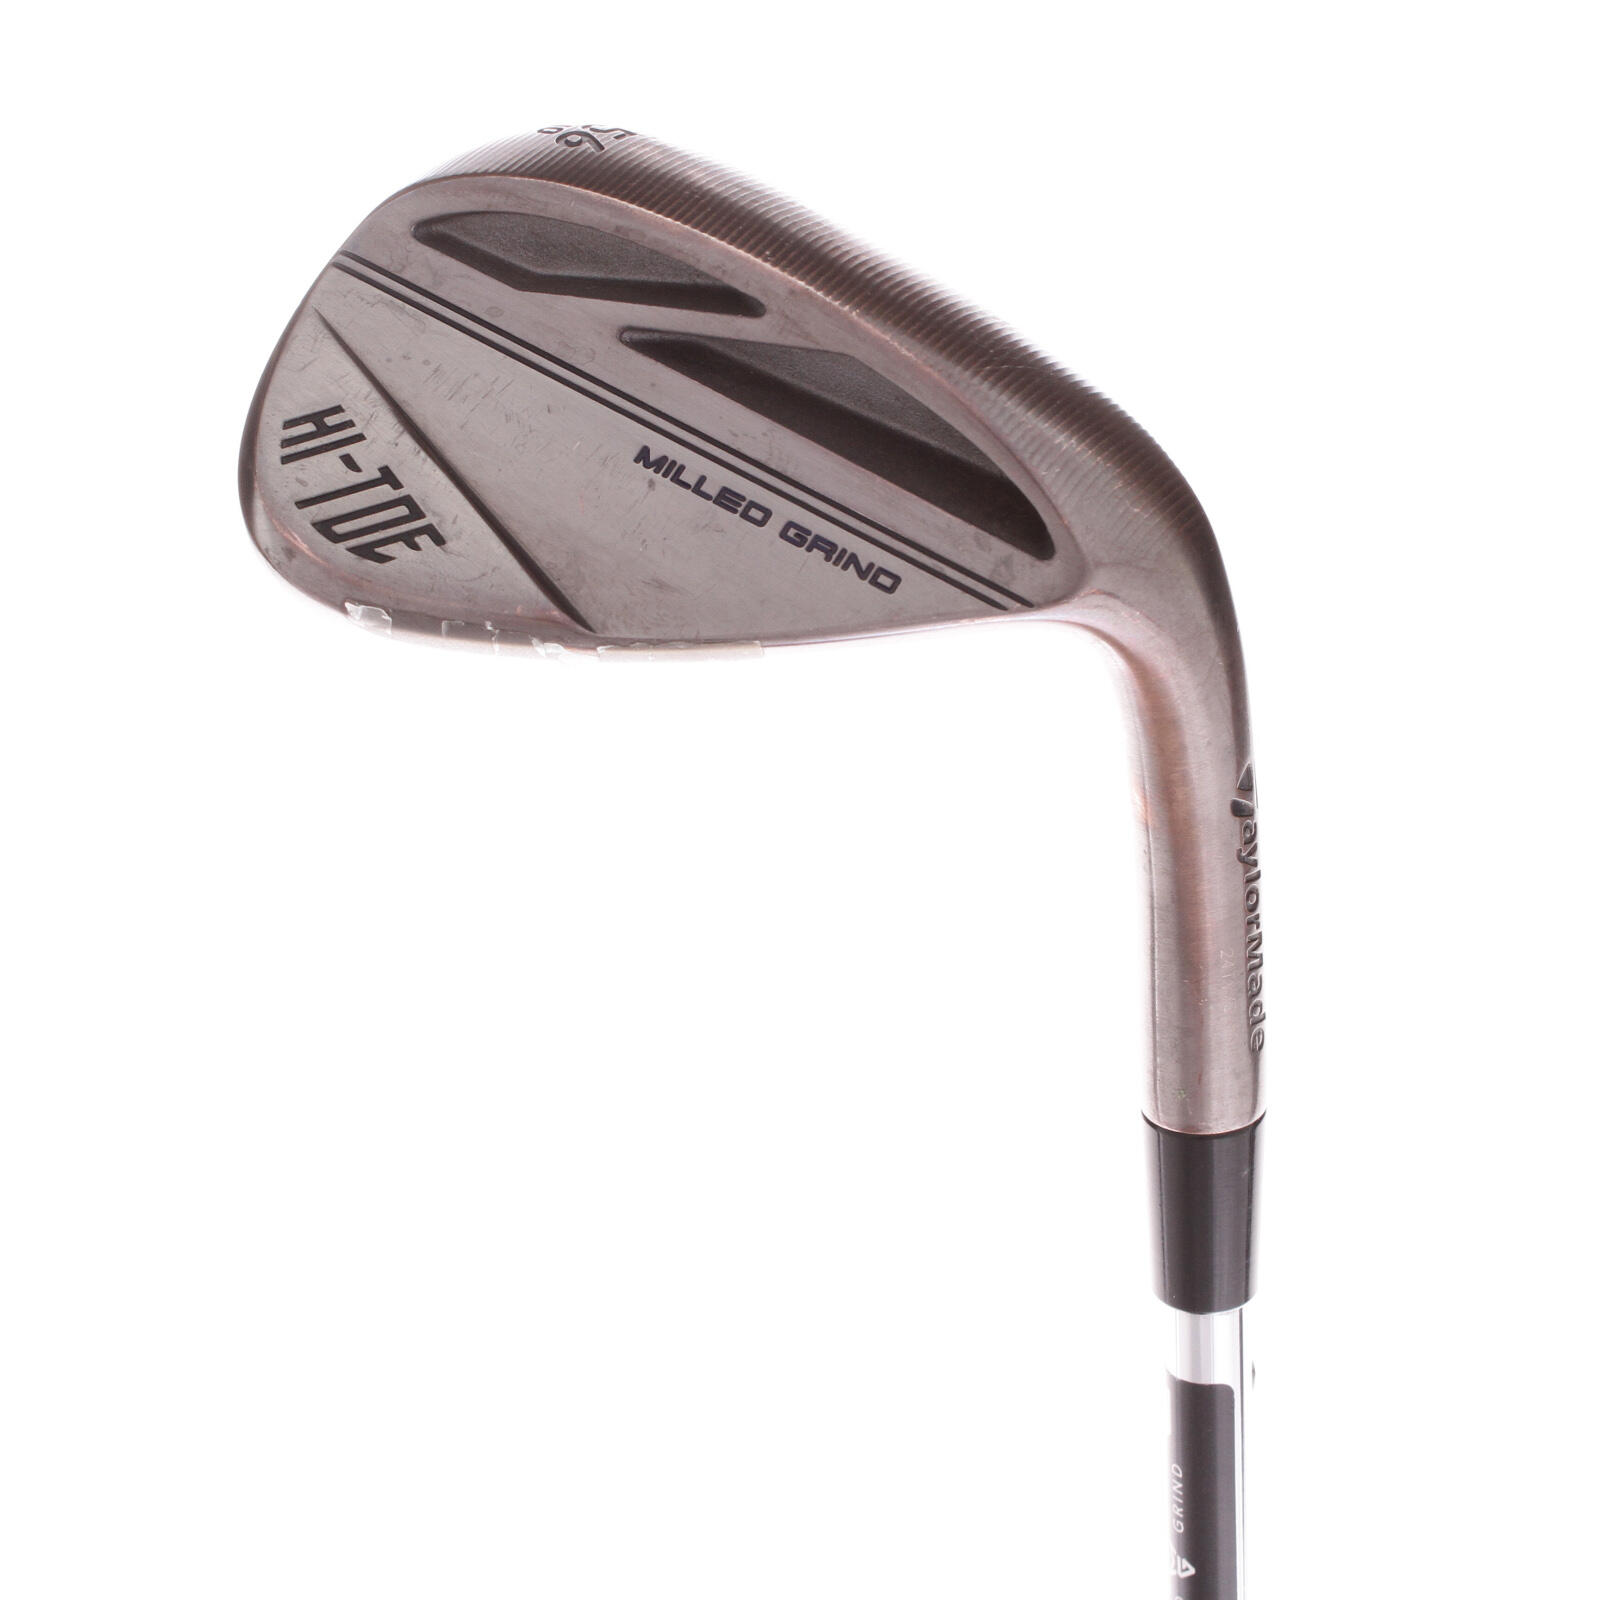 TAYLORMADE USED - Sand Wedge TaylorMade Milled Grind Hi Toe 56 Degree Right Hand - GRADE B